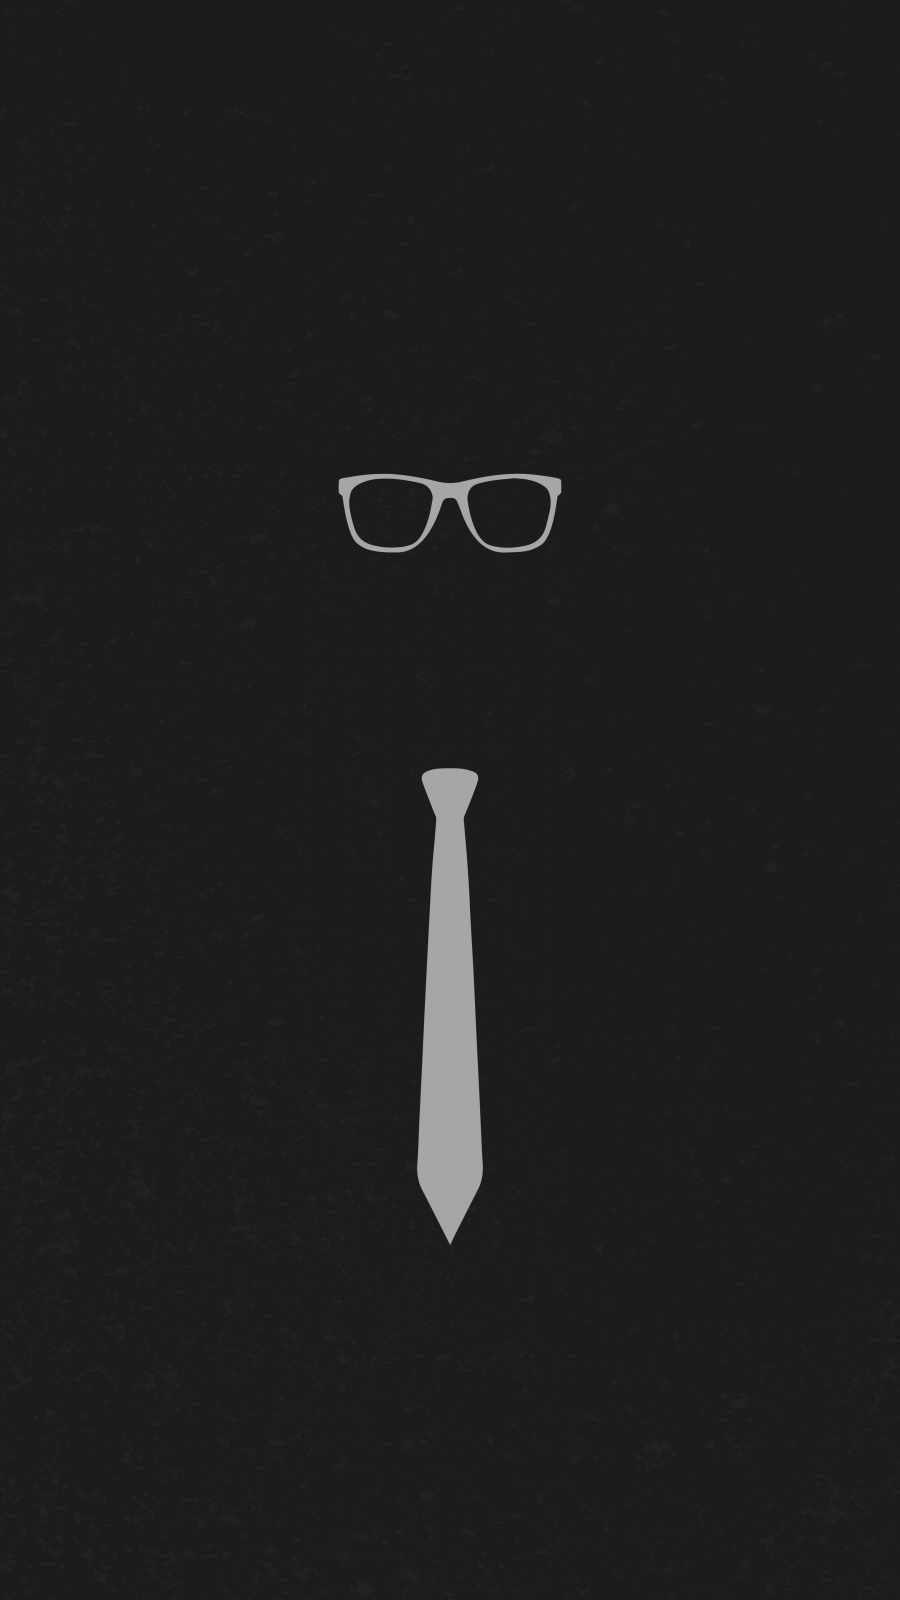 Glasses and Tie iPhone Wallpaper